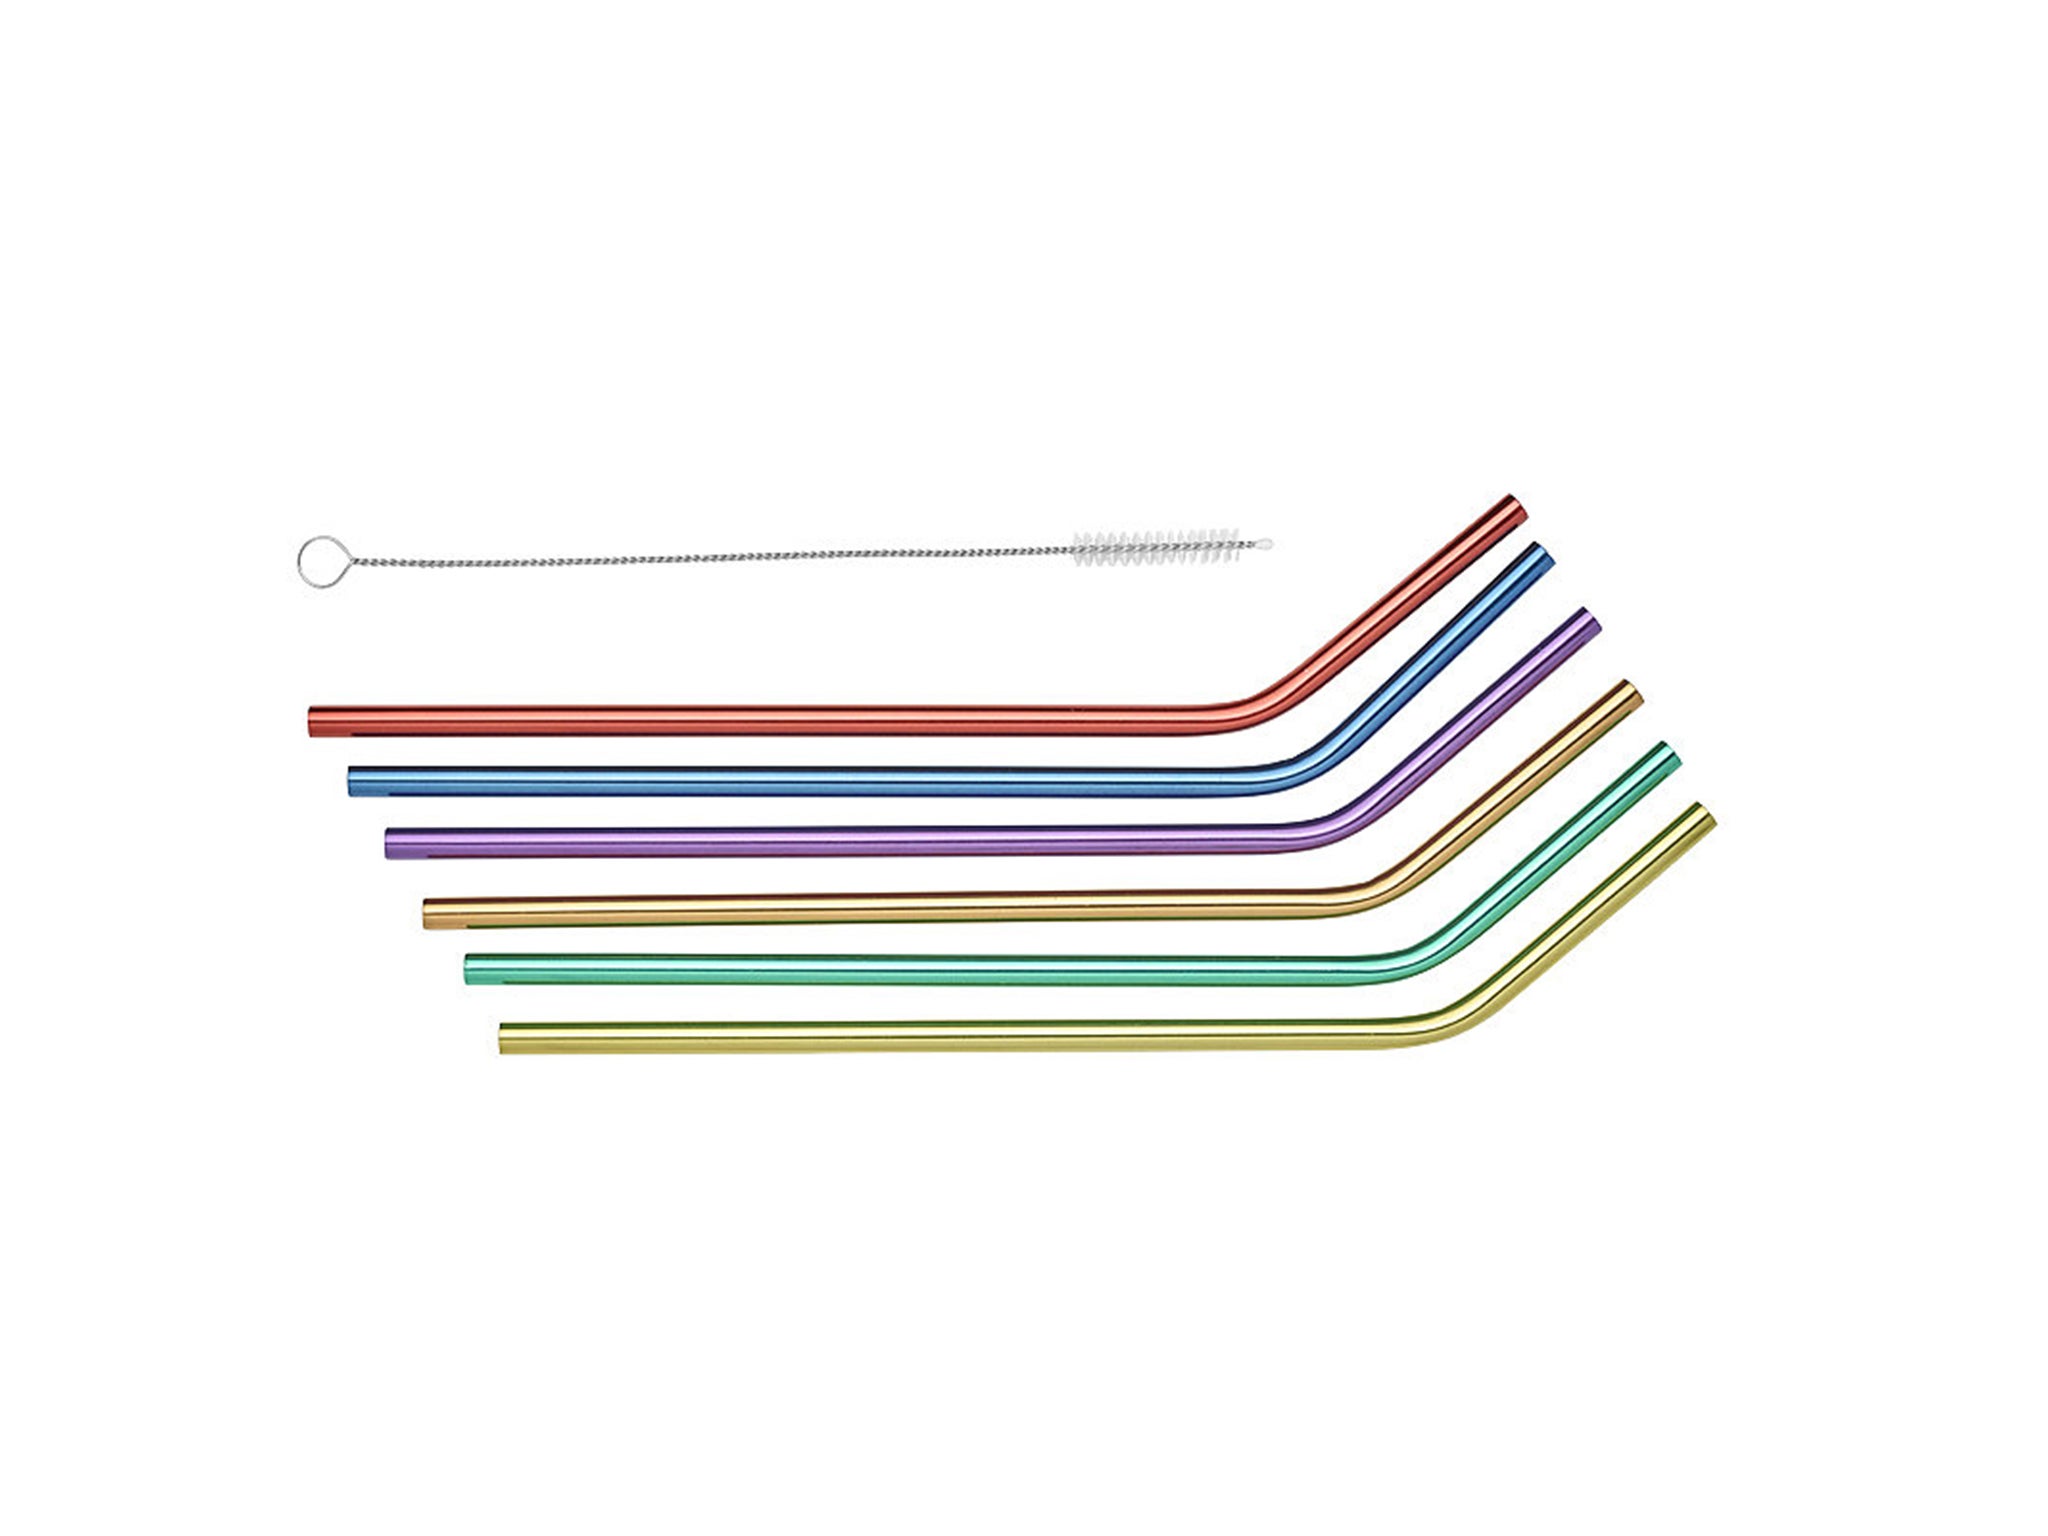 Stainless steel straws are durable, hard-wearing and an eco-friendly alternative to single-use plastic